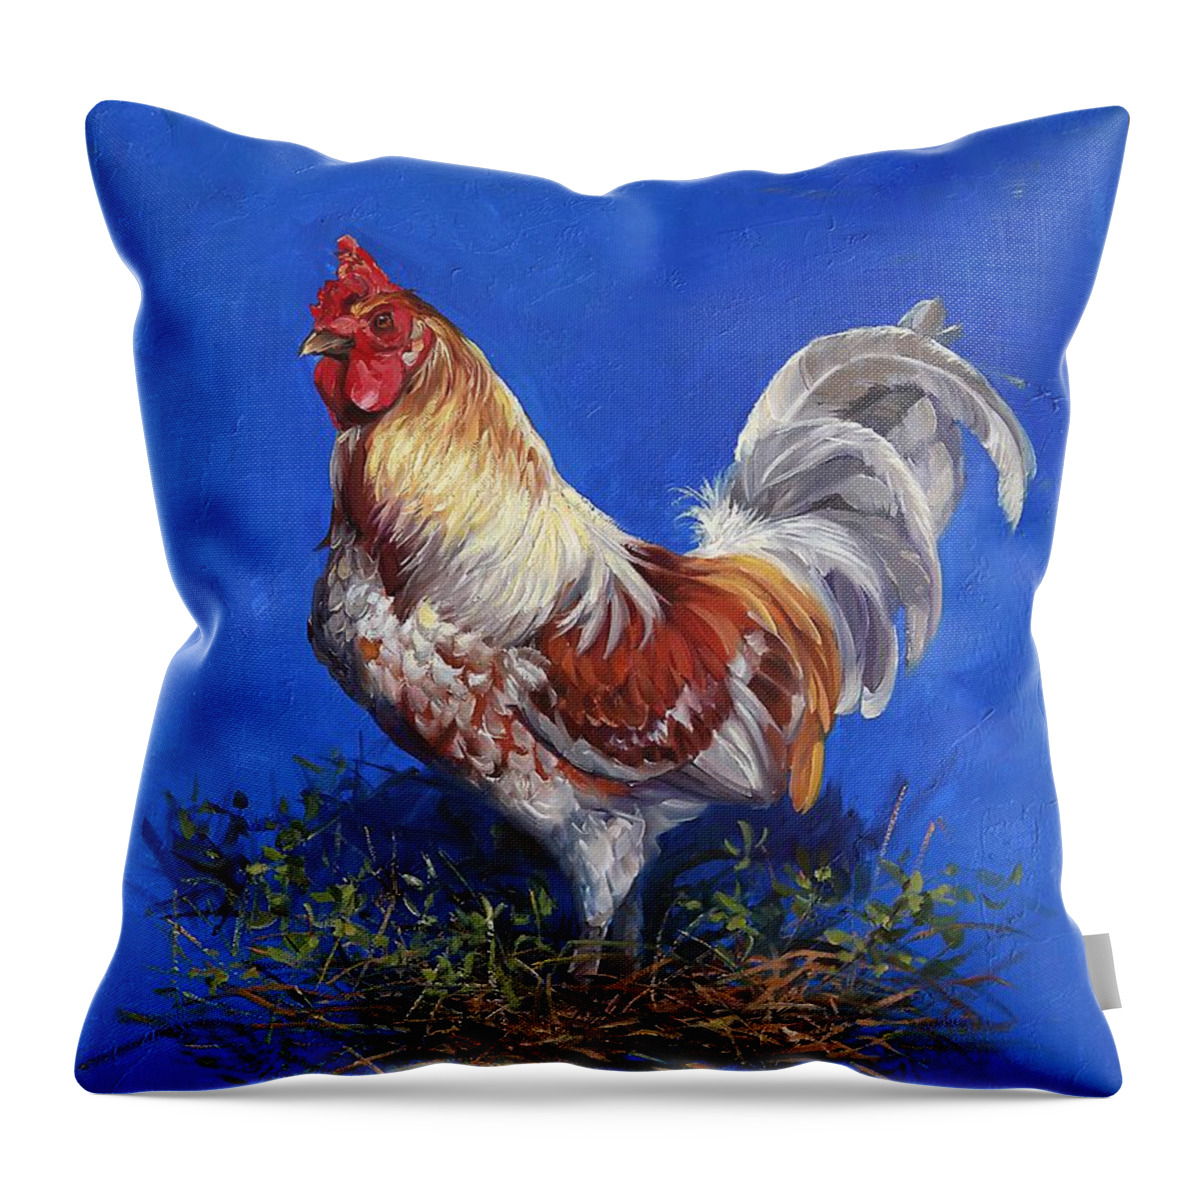 Animal Throw Pillow featuring the painting Silver Cockerel by Laurie Snow Hein